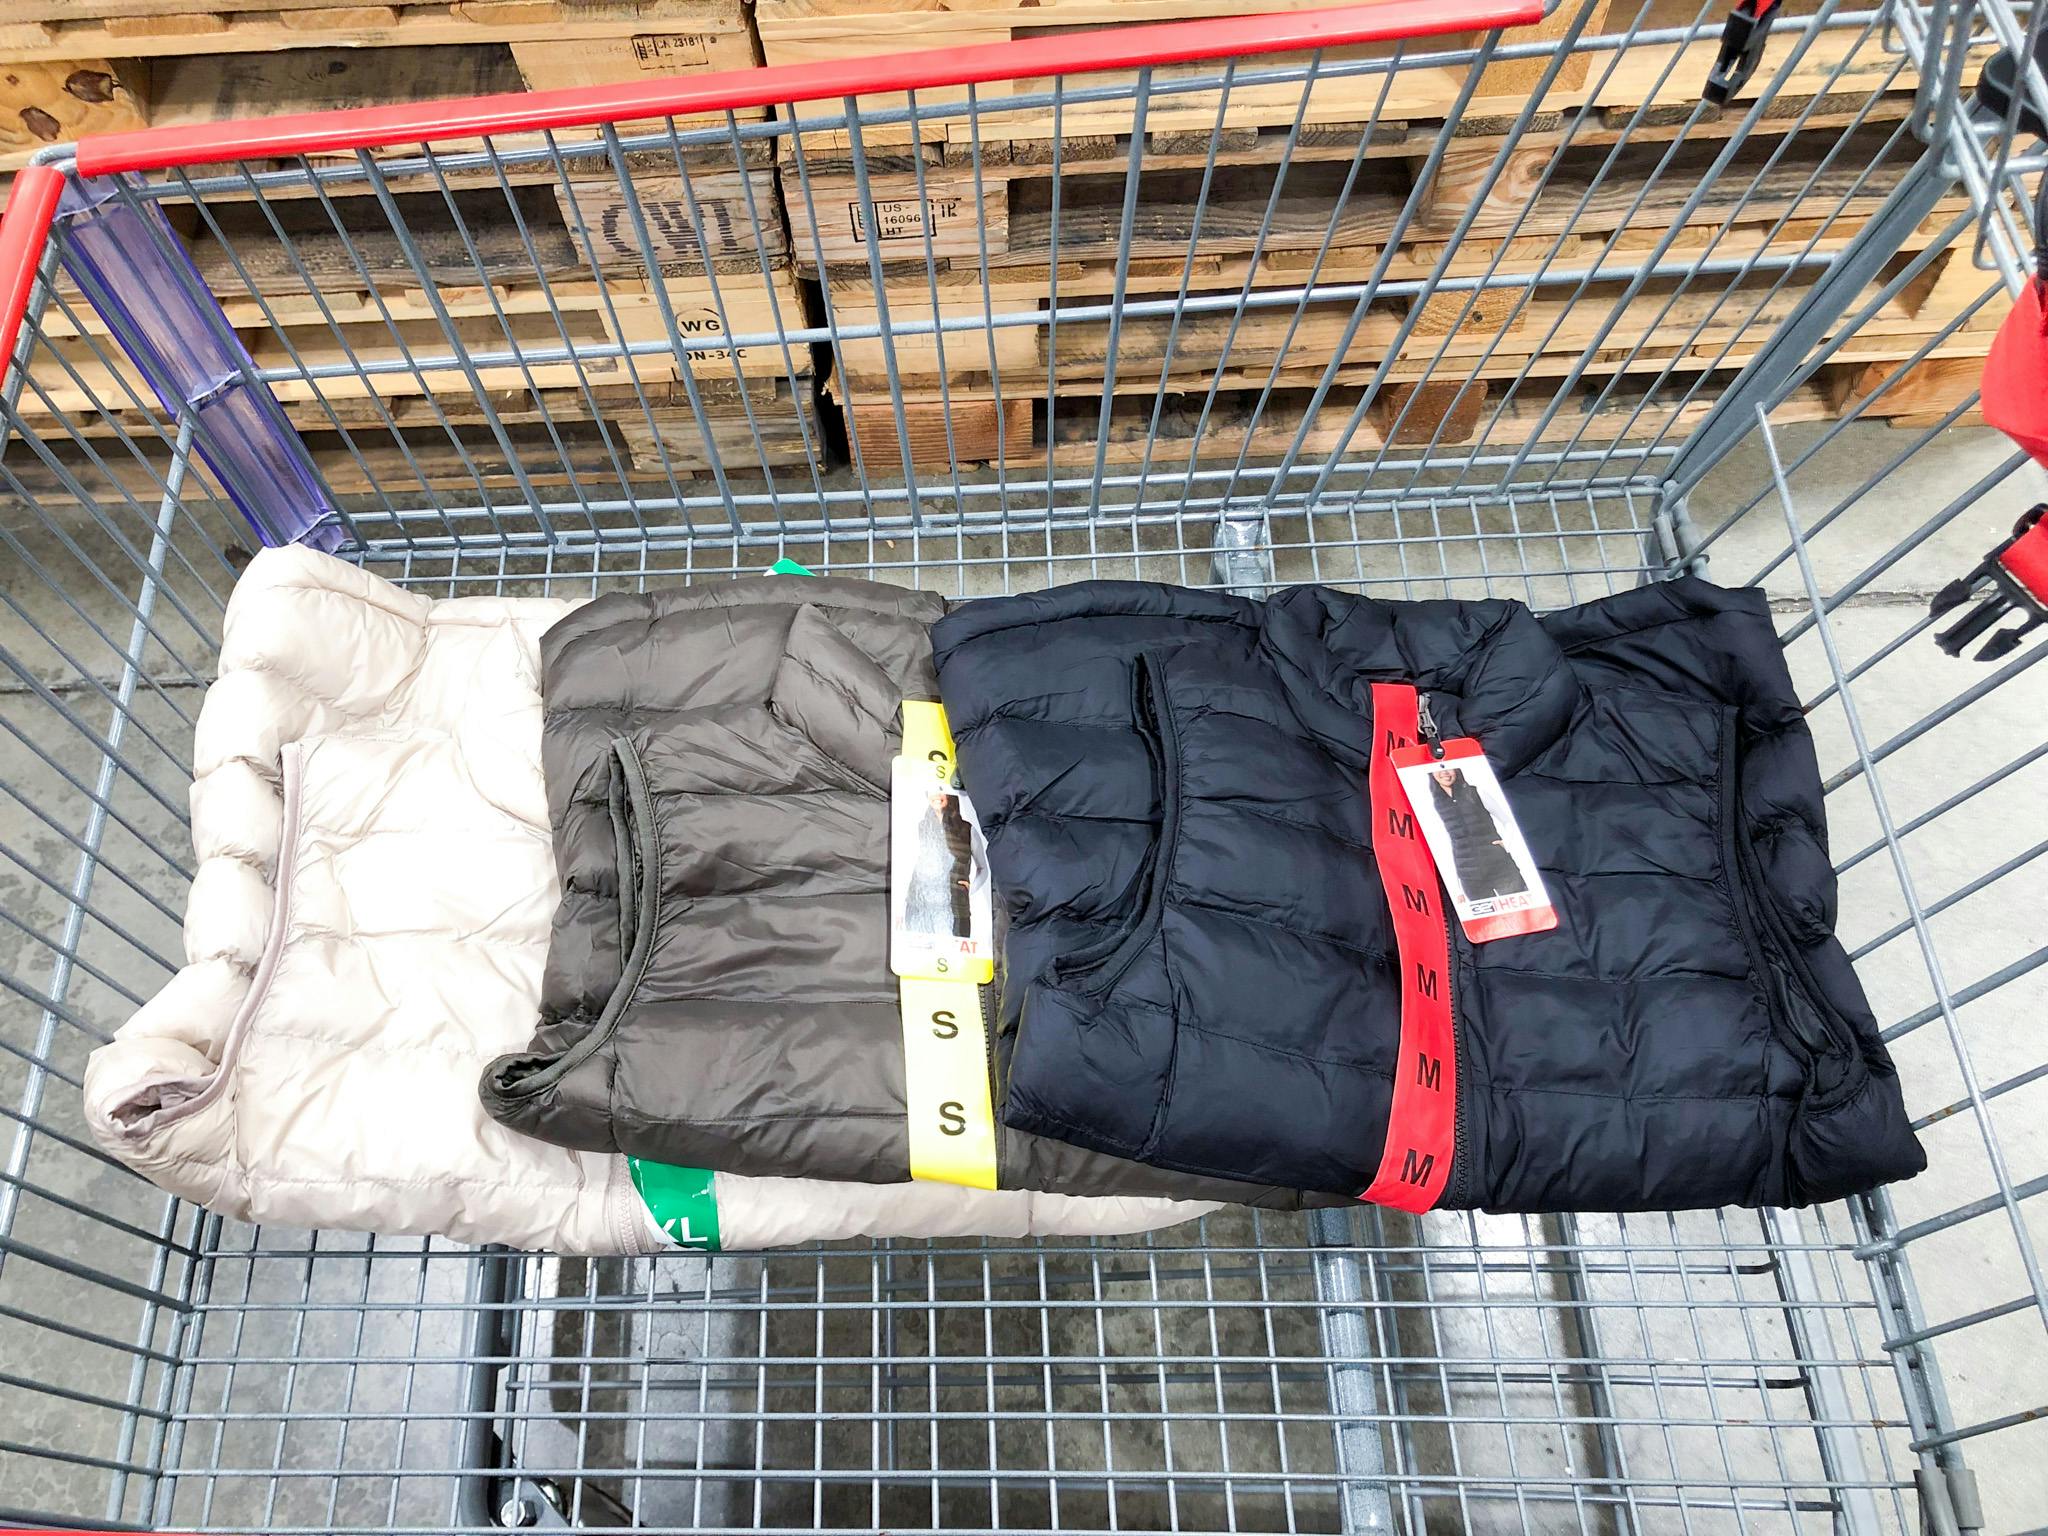 Tandheelkundig richting Charles Keasing 32 Degrees Vest, Just $10.99 at Costco (Reg. $13.99) - The Krazy Coupon Lady